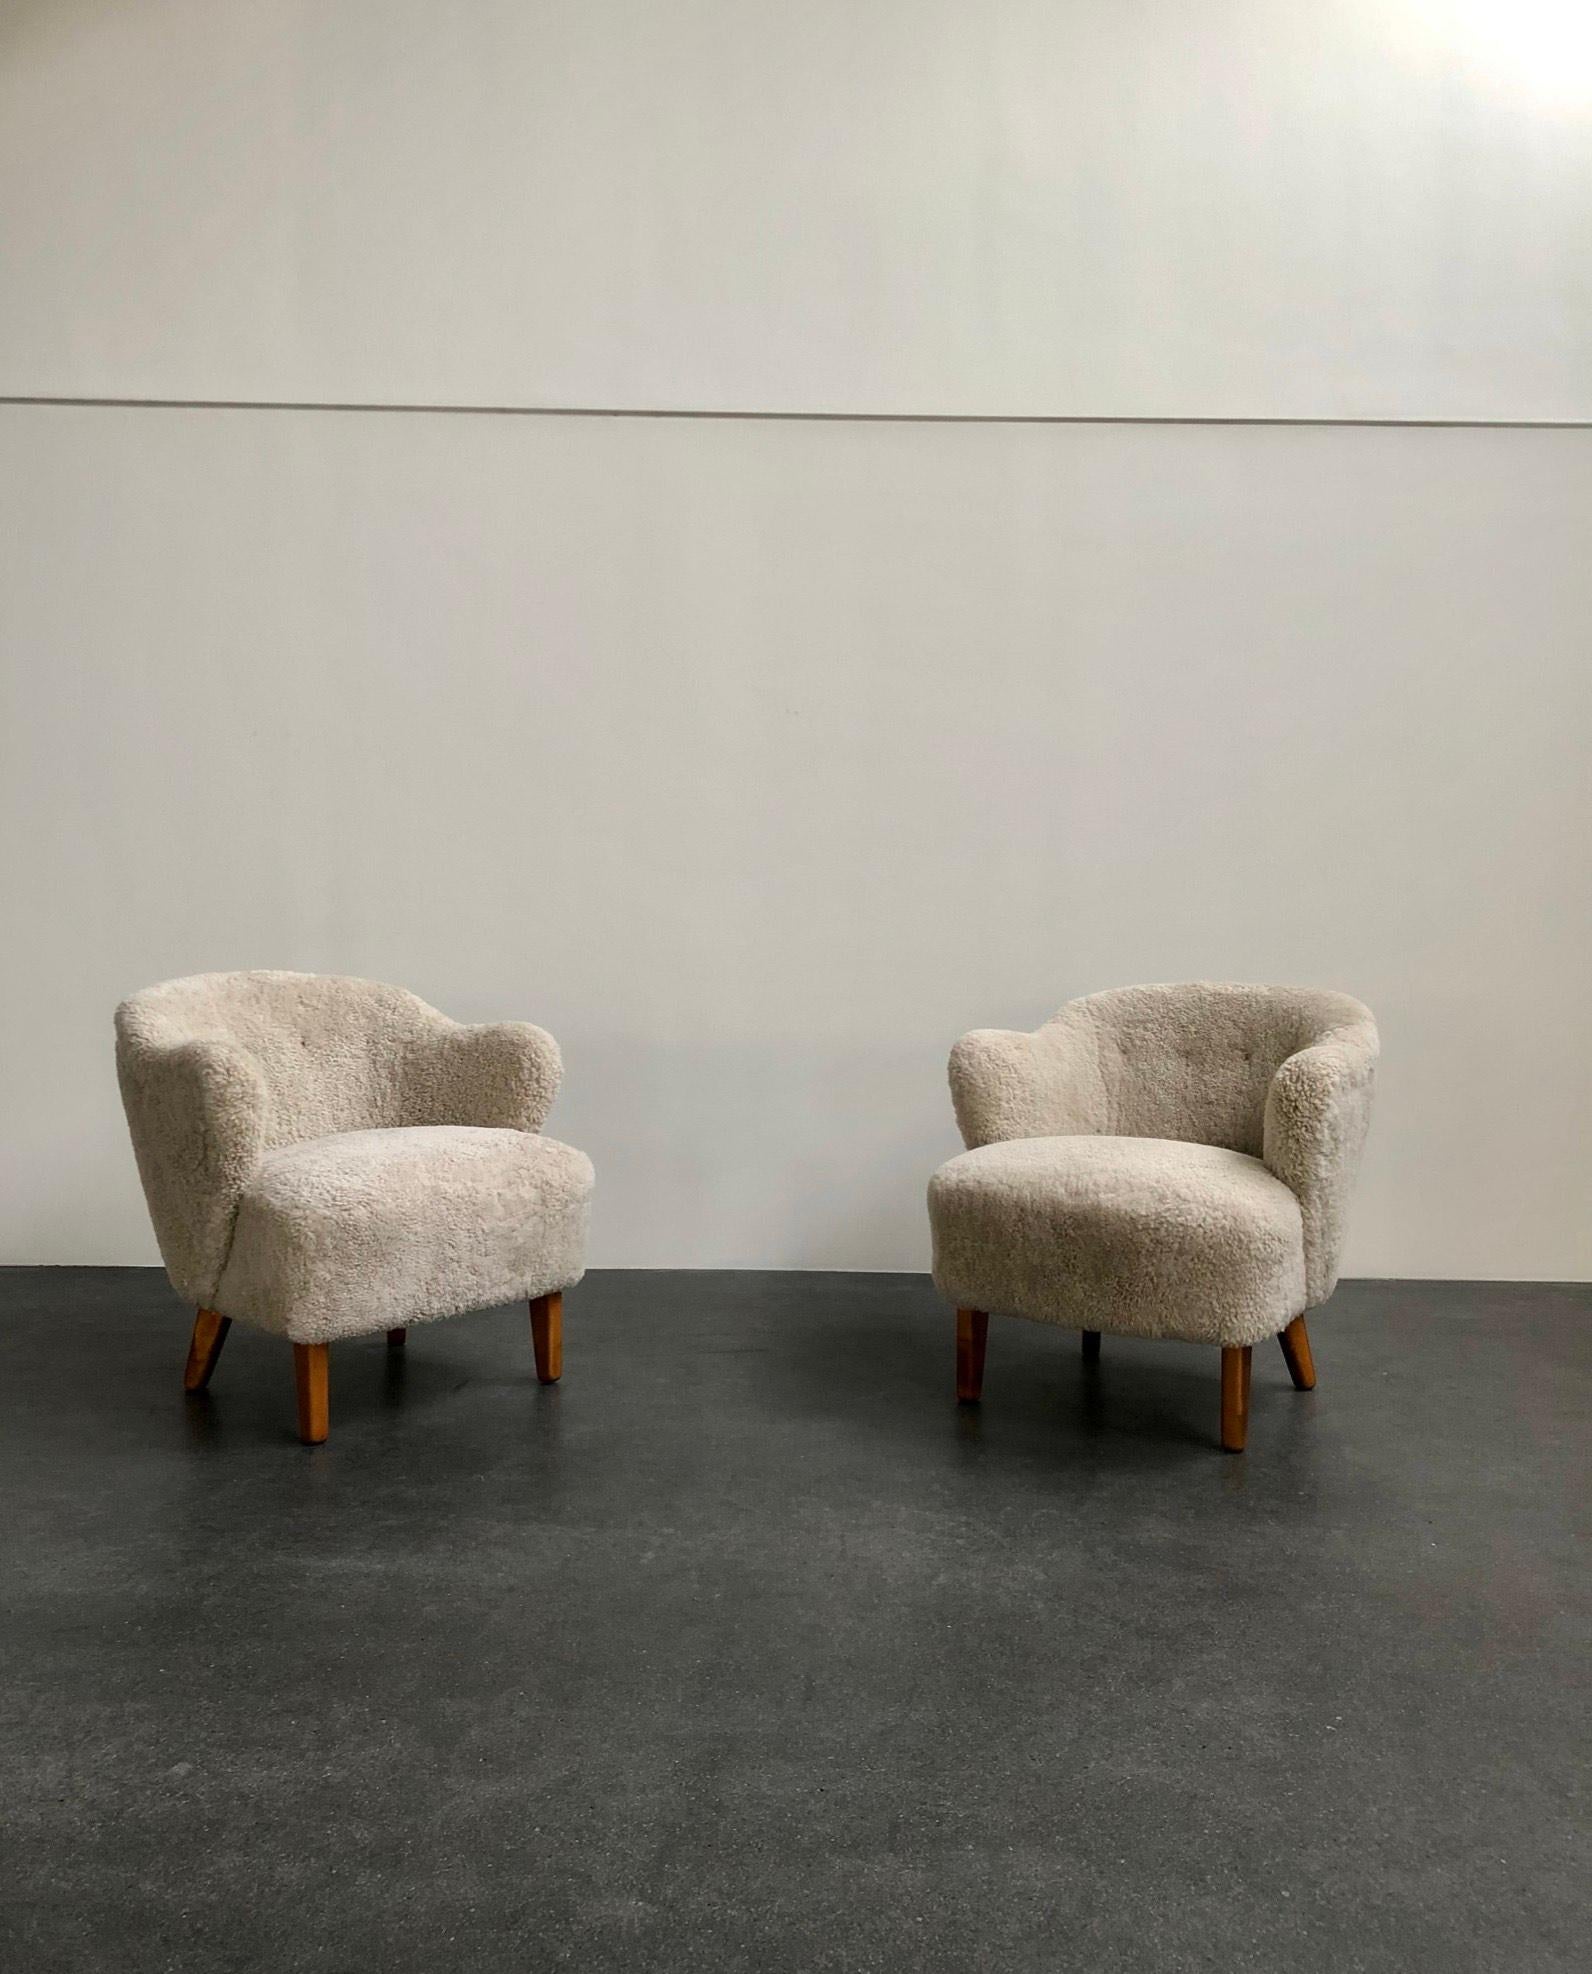 Flemming Lassen, pair of easy chairs for master cabinetmaker Jacob Kjaer, Denmark. Tapering legs in stained ash and reupholstered in beige sheepskin.

The model was presented at The Copenhagen Cabinetmakers' Guild Exhibition in 1940.

Price is for